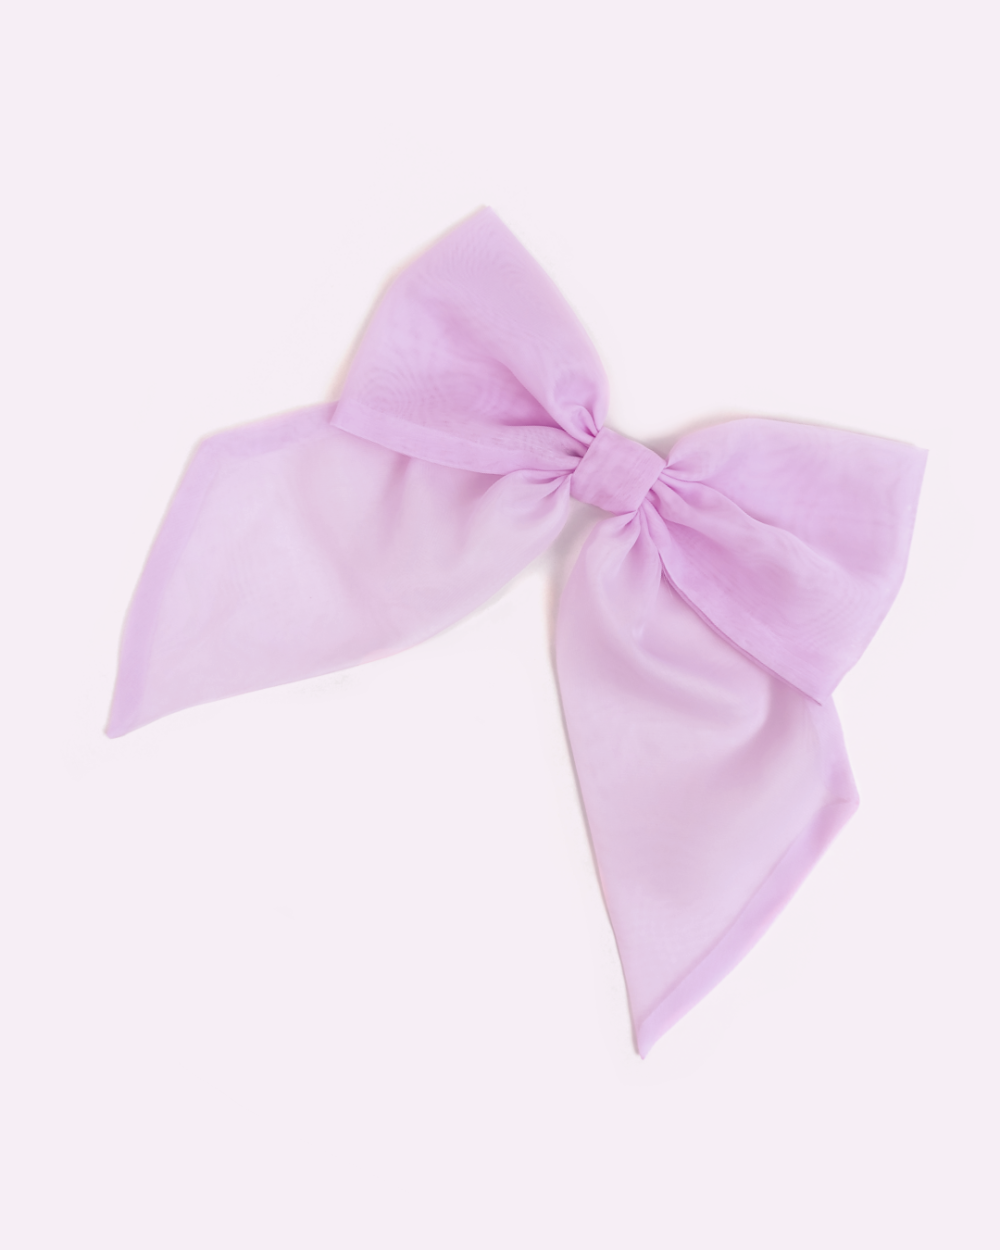 Lilac brooch in the shape of a giant bow made of voile by melikestea.